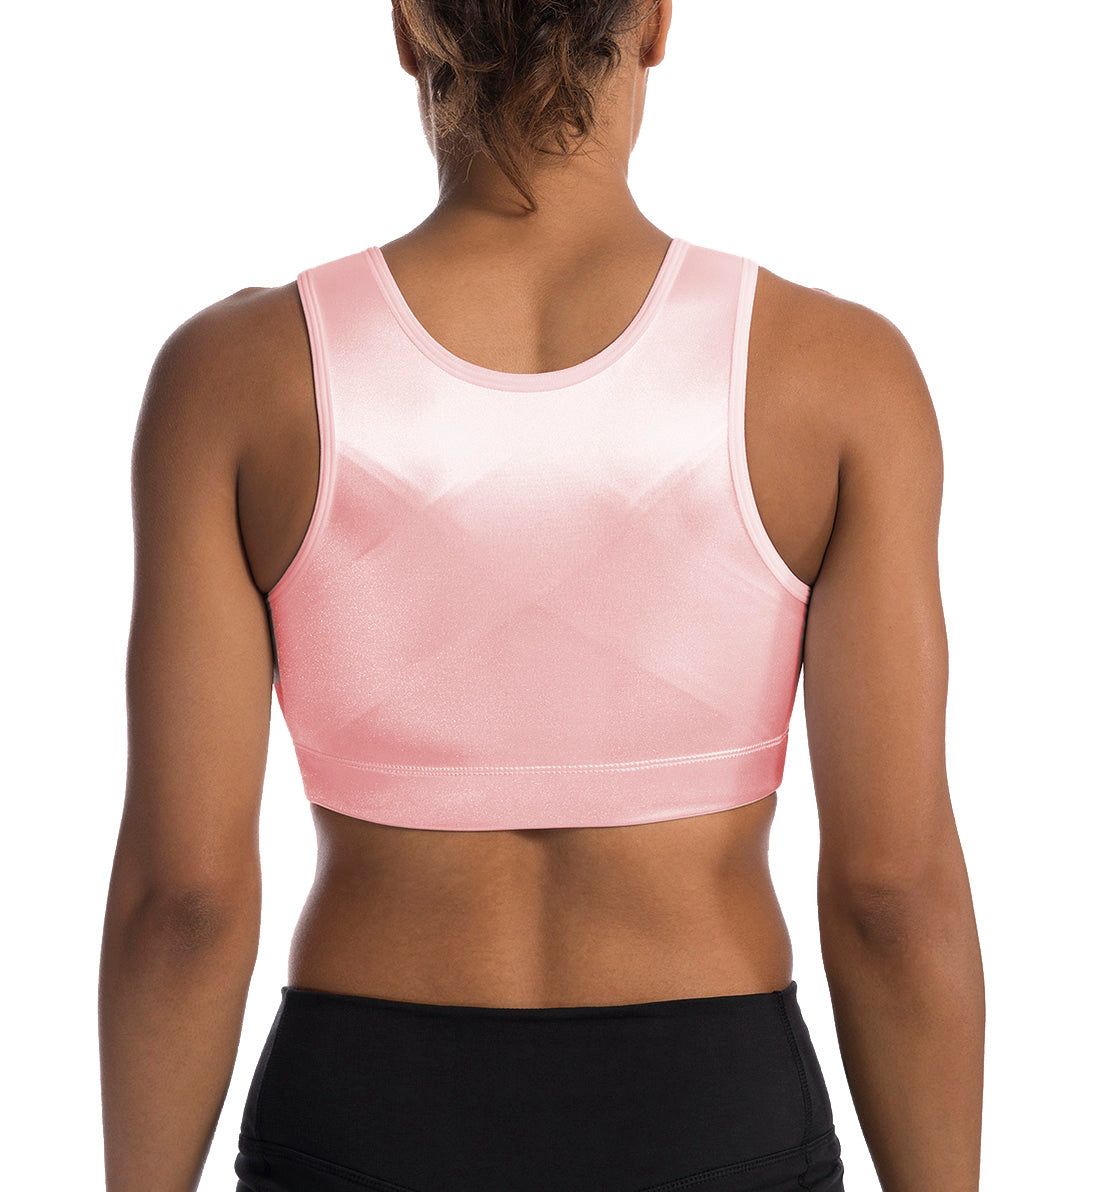 Enell High Impact Sports Bra (100),00,Hope Pink - Hope Pink,00